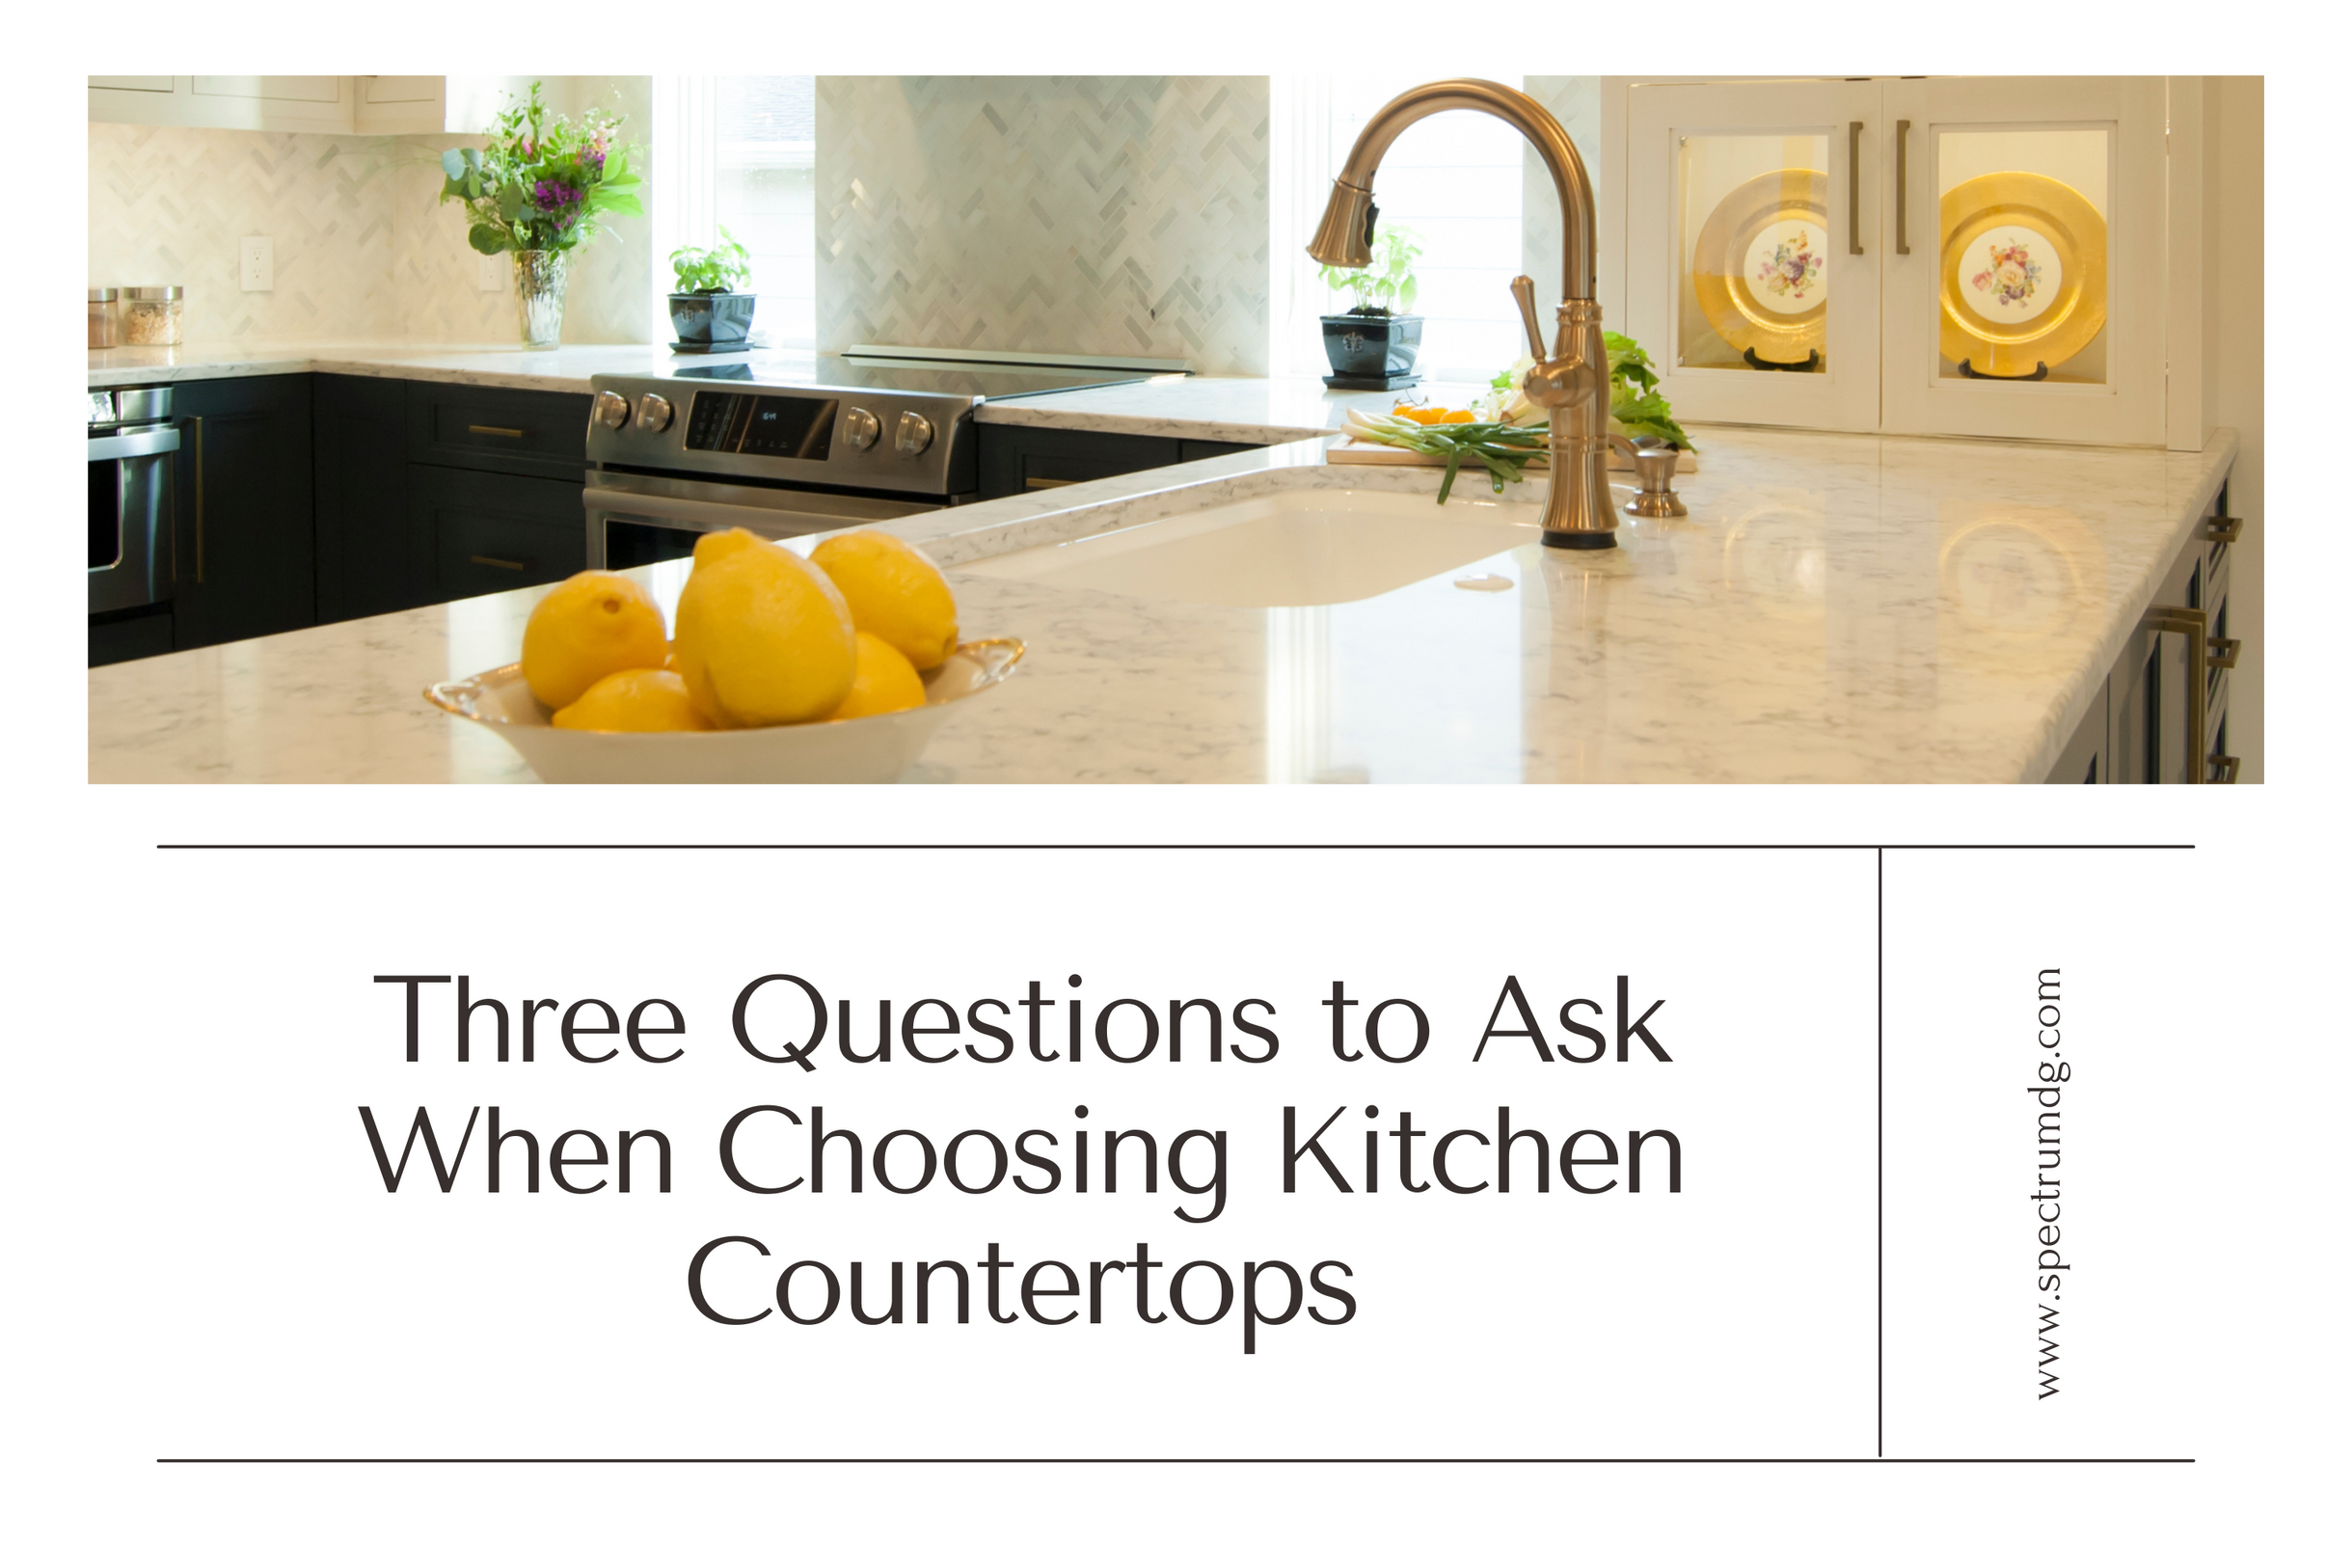 Three Questions to Ask When Choosing Kitchen Countertops